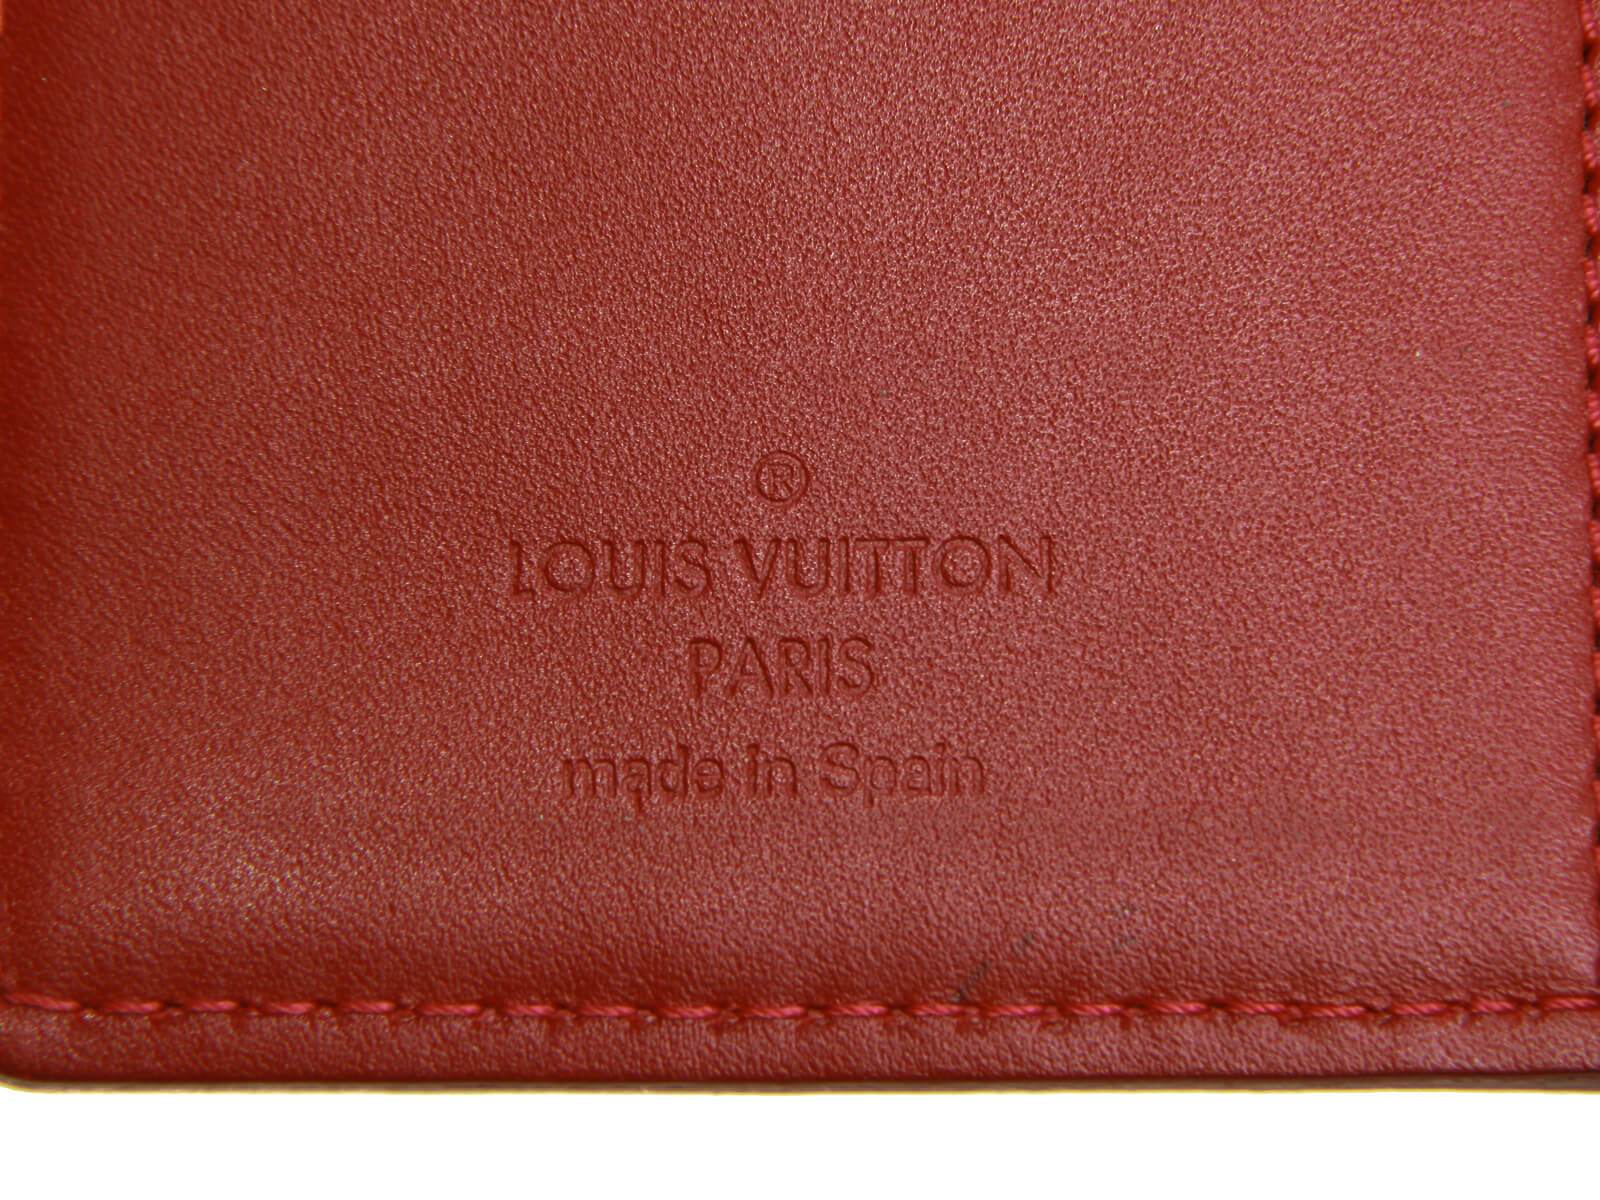 Authentic Louis Vuitton Vernis Agenda PM R21016 Day Planner Red 100895